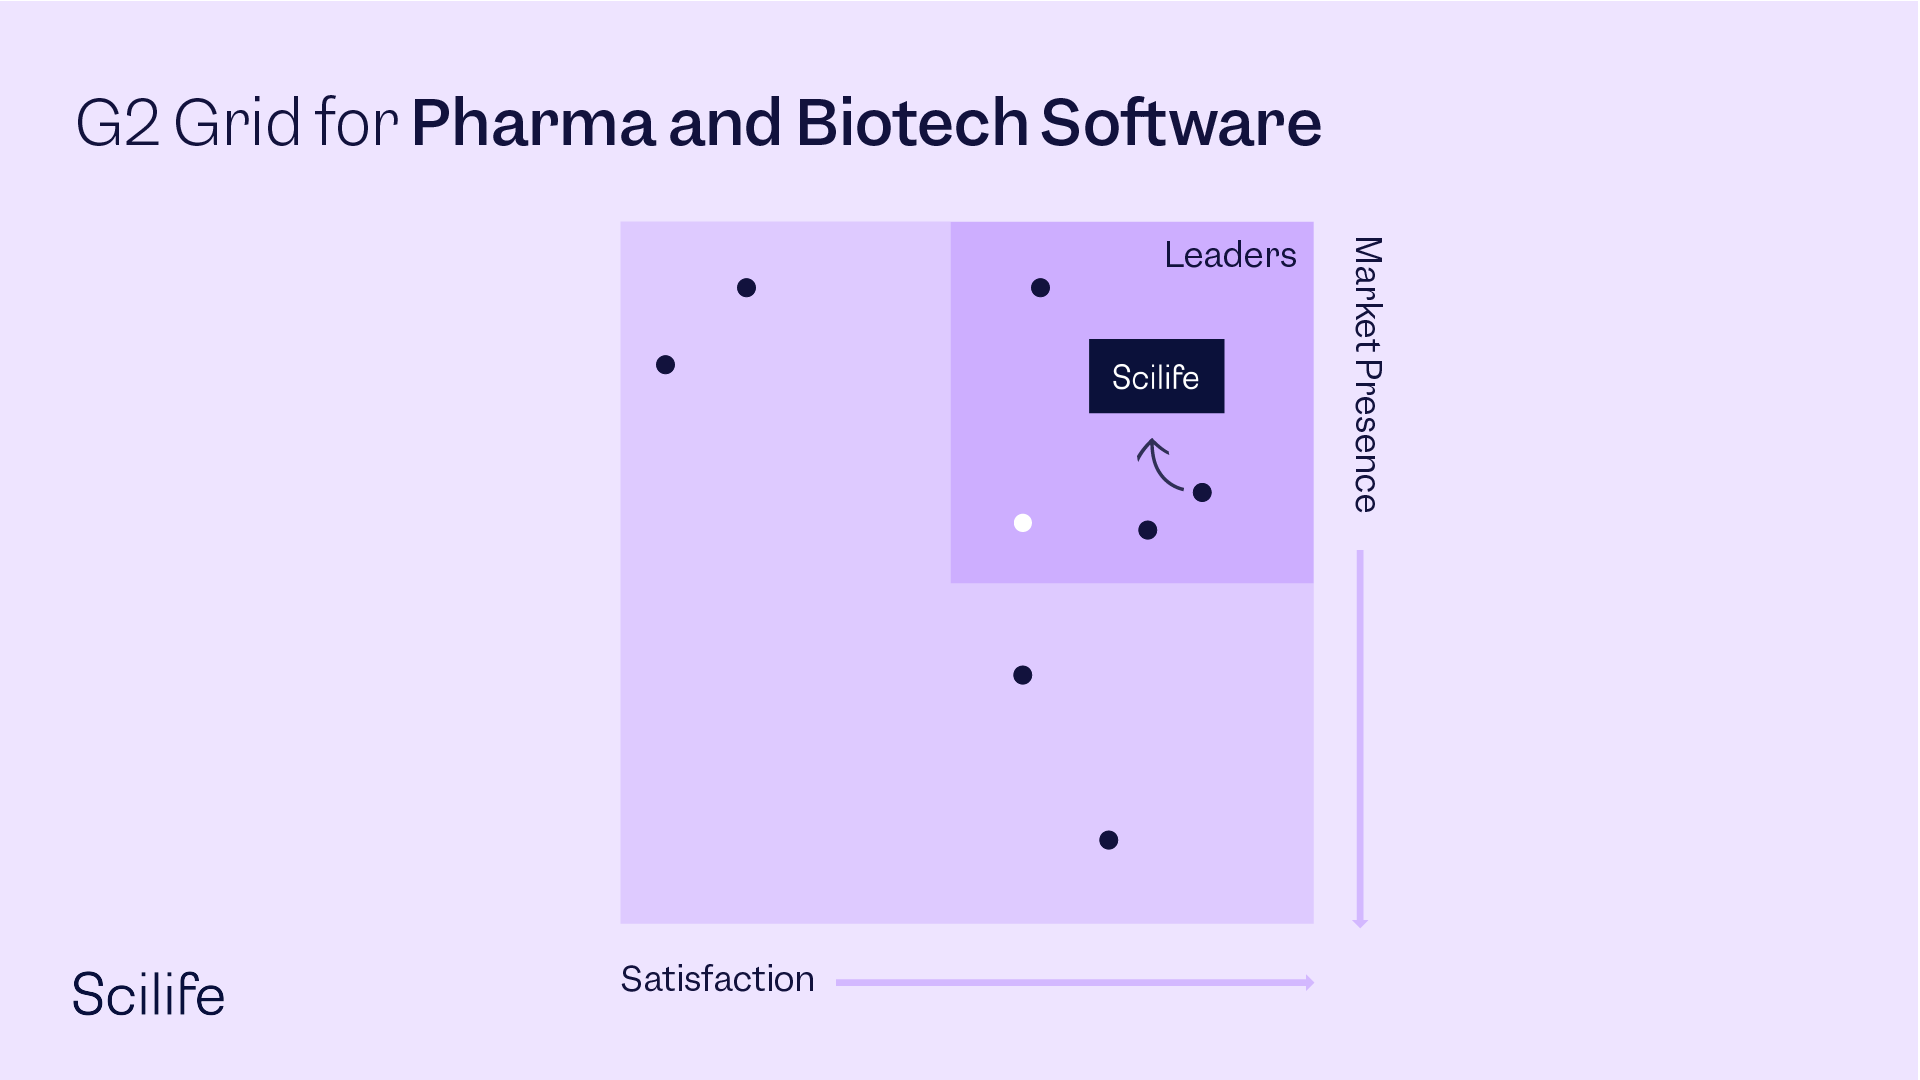 Infographic that represents Scilife's position in the Market compared to other Pharma and Biotech softwares